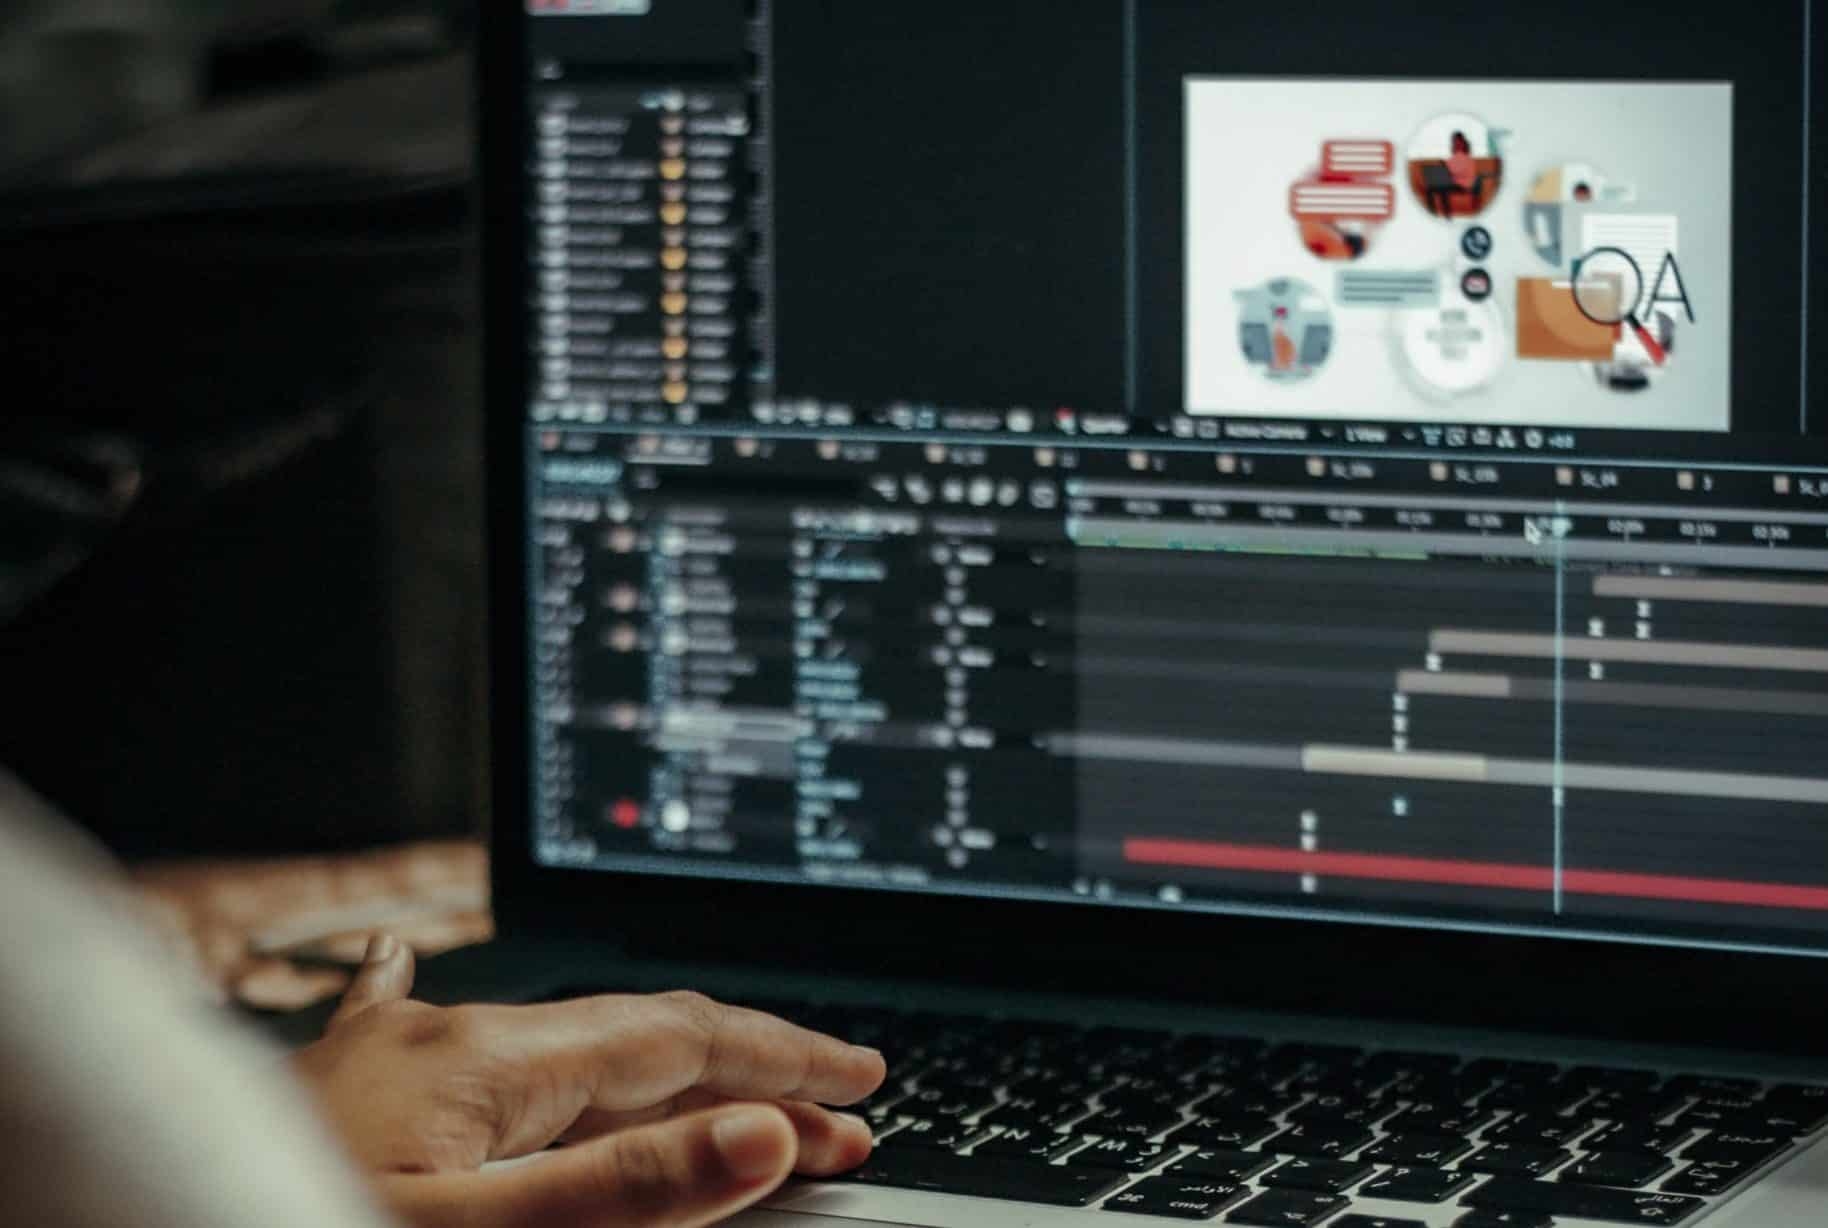 How to Make Adobe After Effects Run Faster in 8 Steps